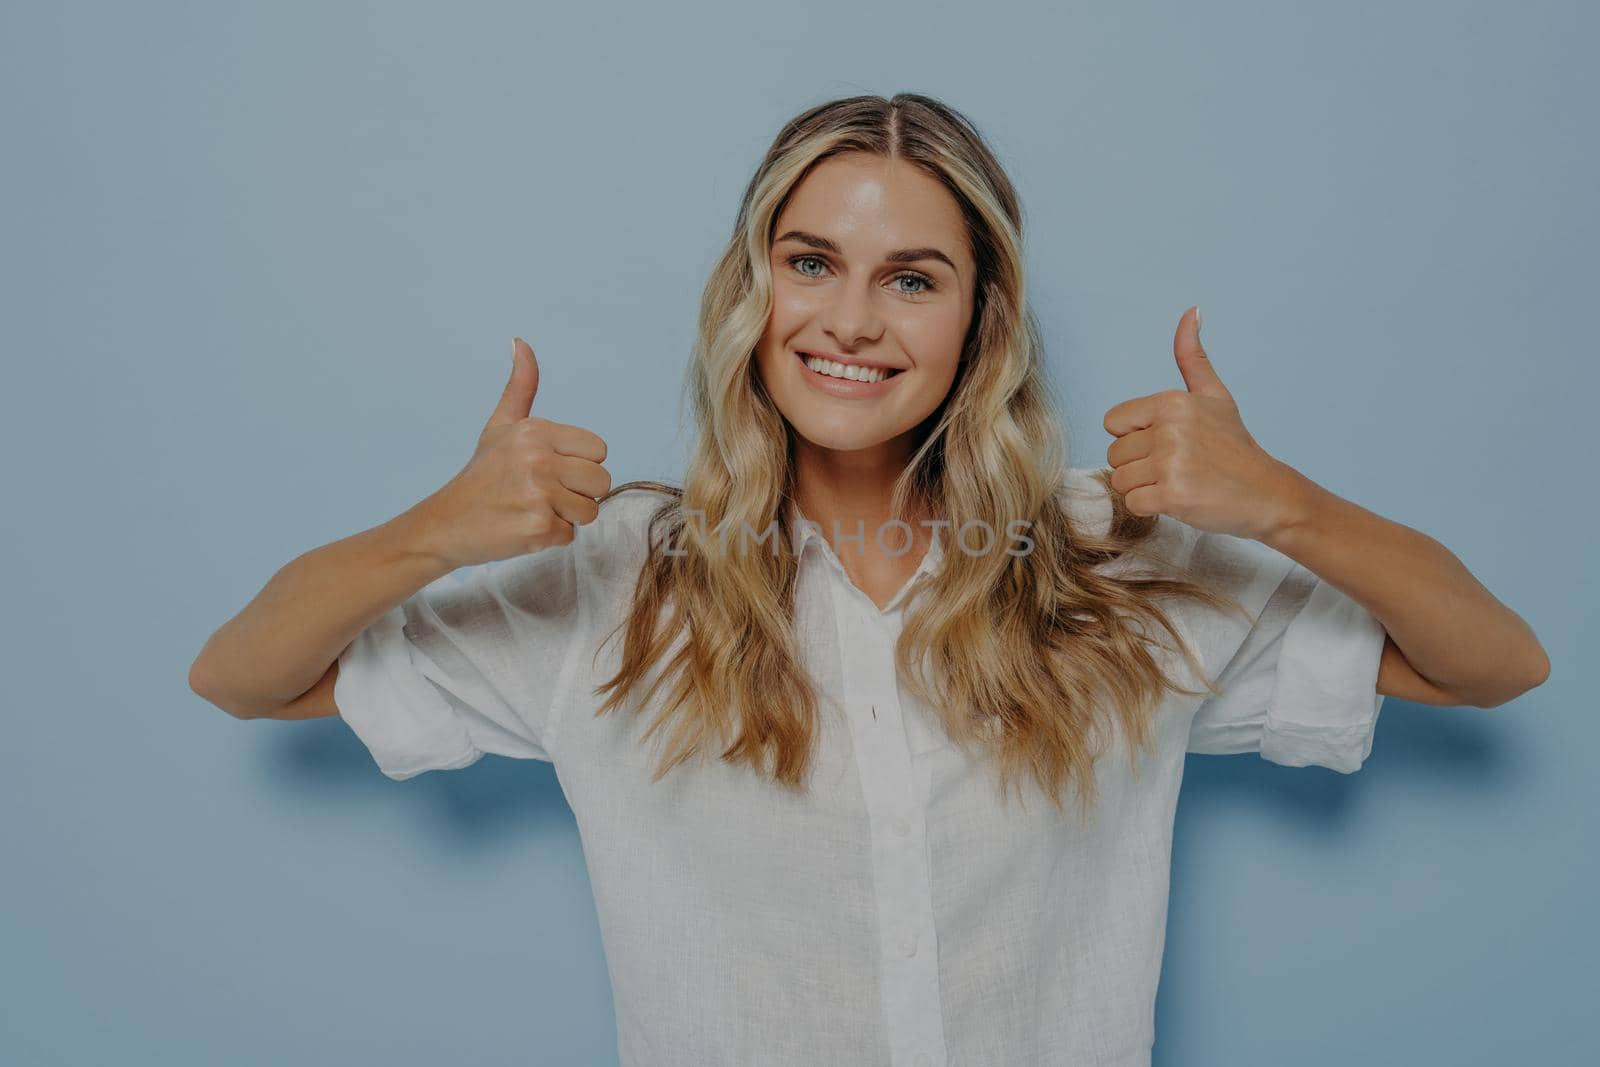 Blonde girl showing thumbs up gesture with both hands by vkstock